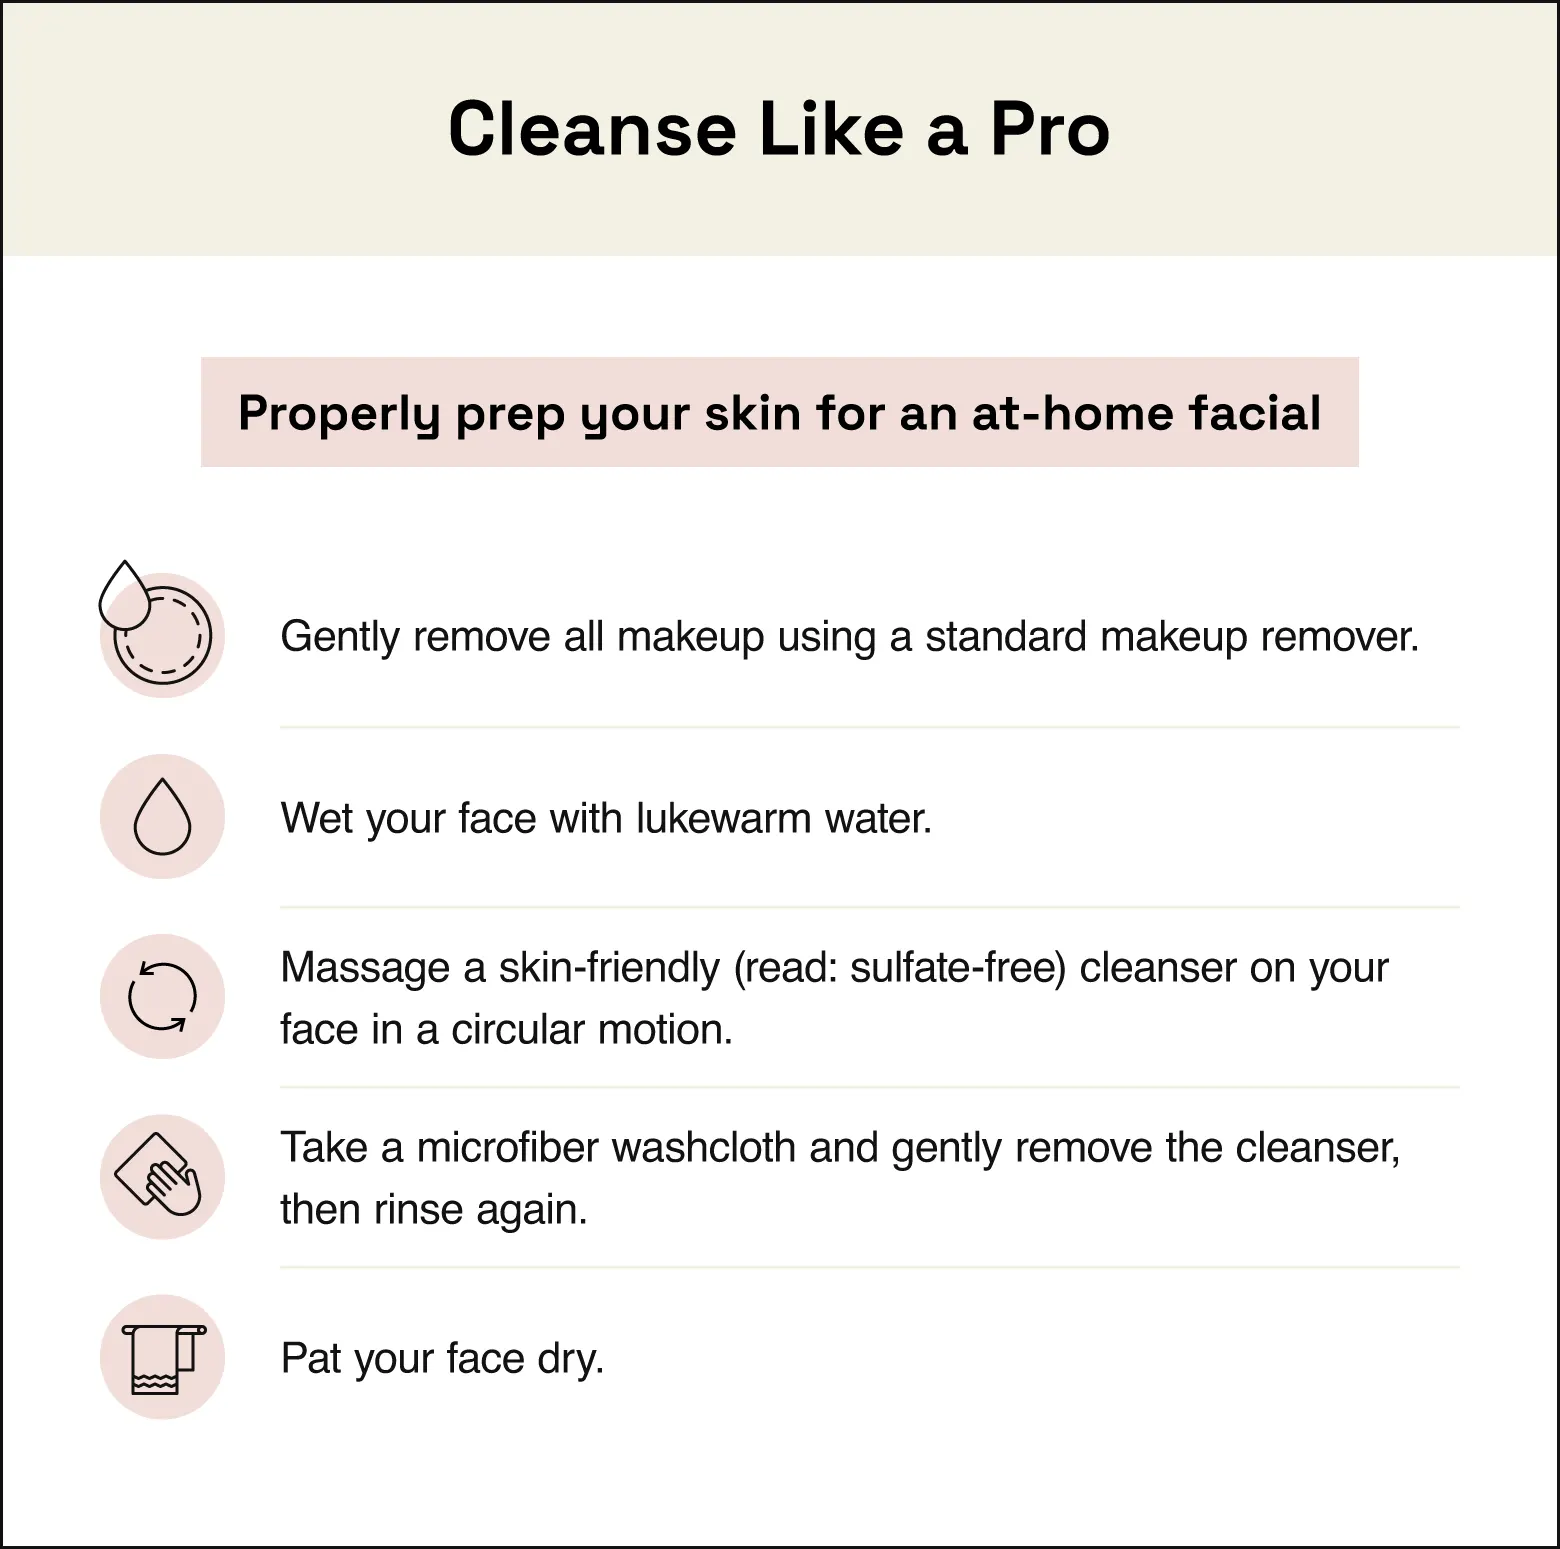 Image recounts steps for cleansing before applying an at-home facial.